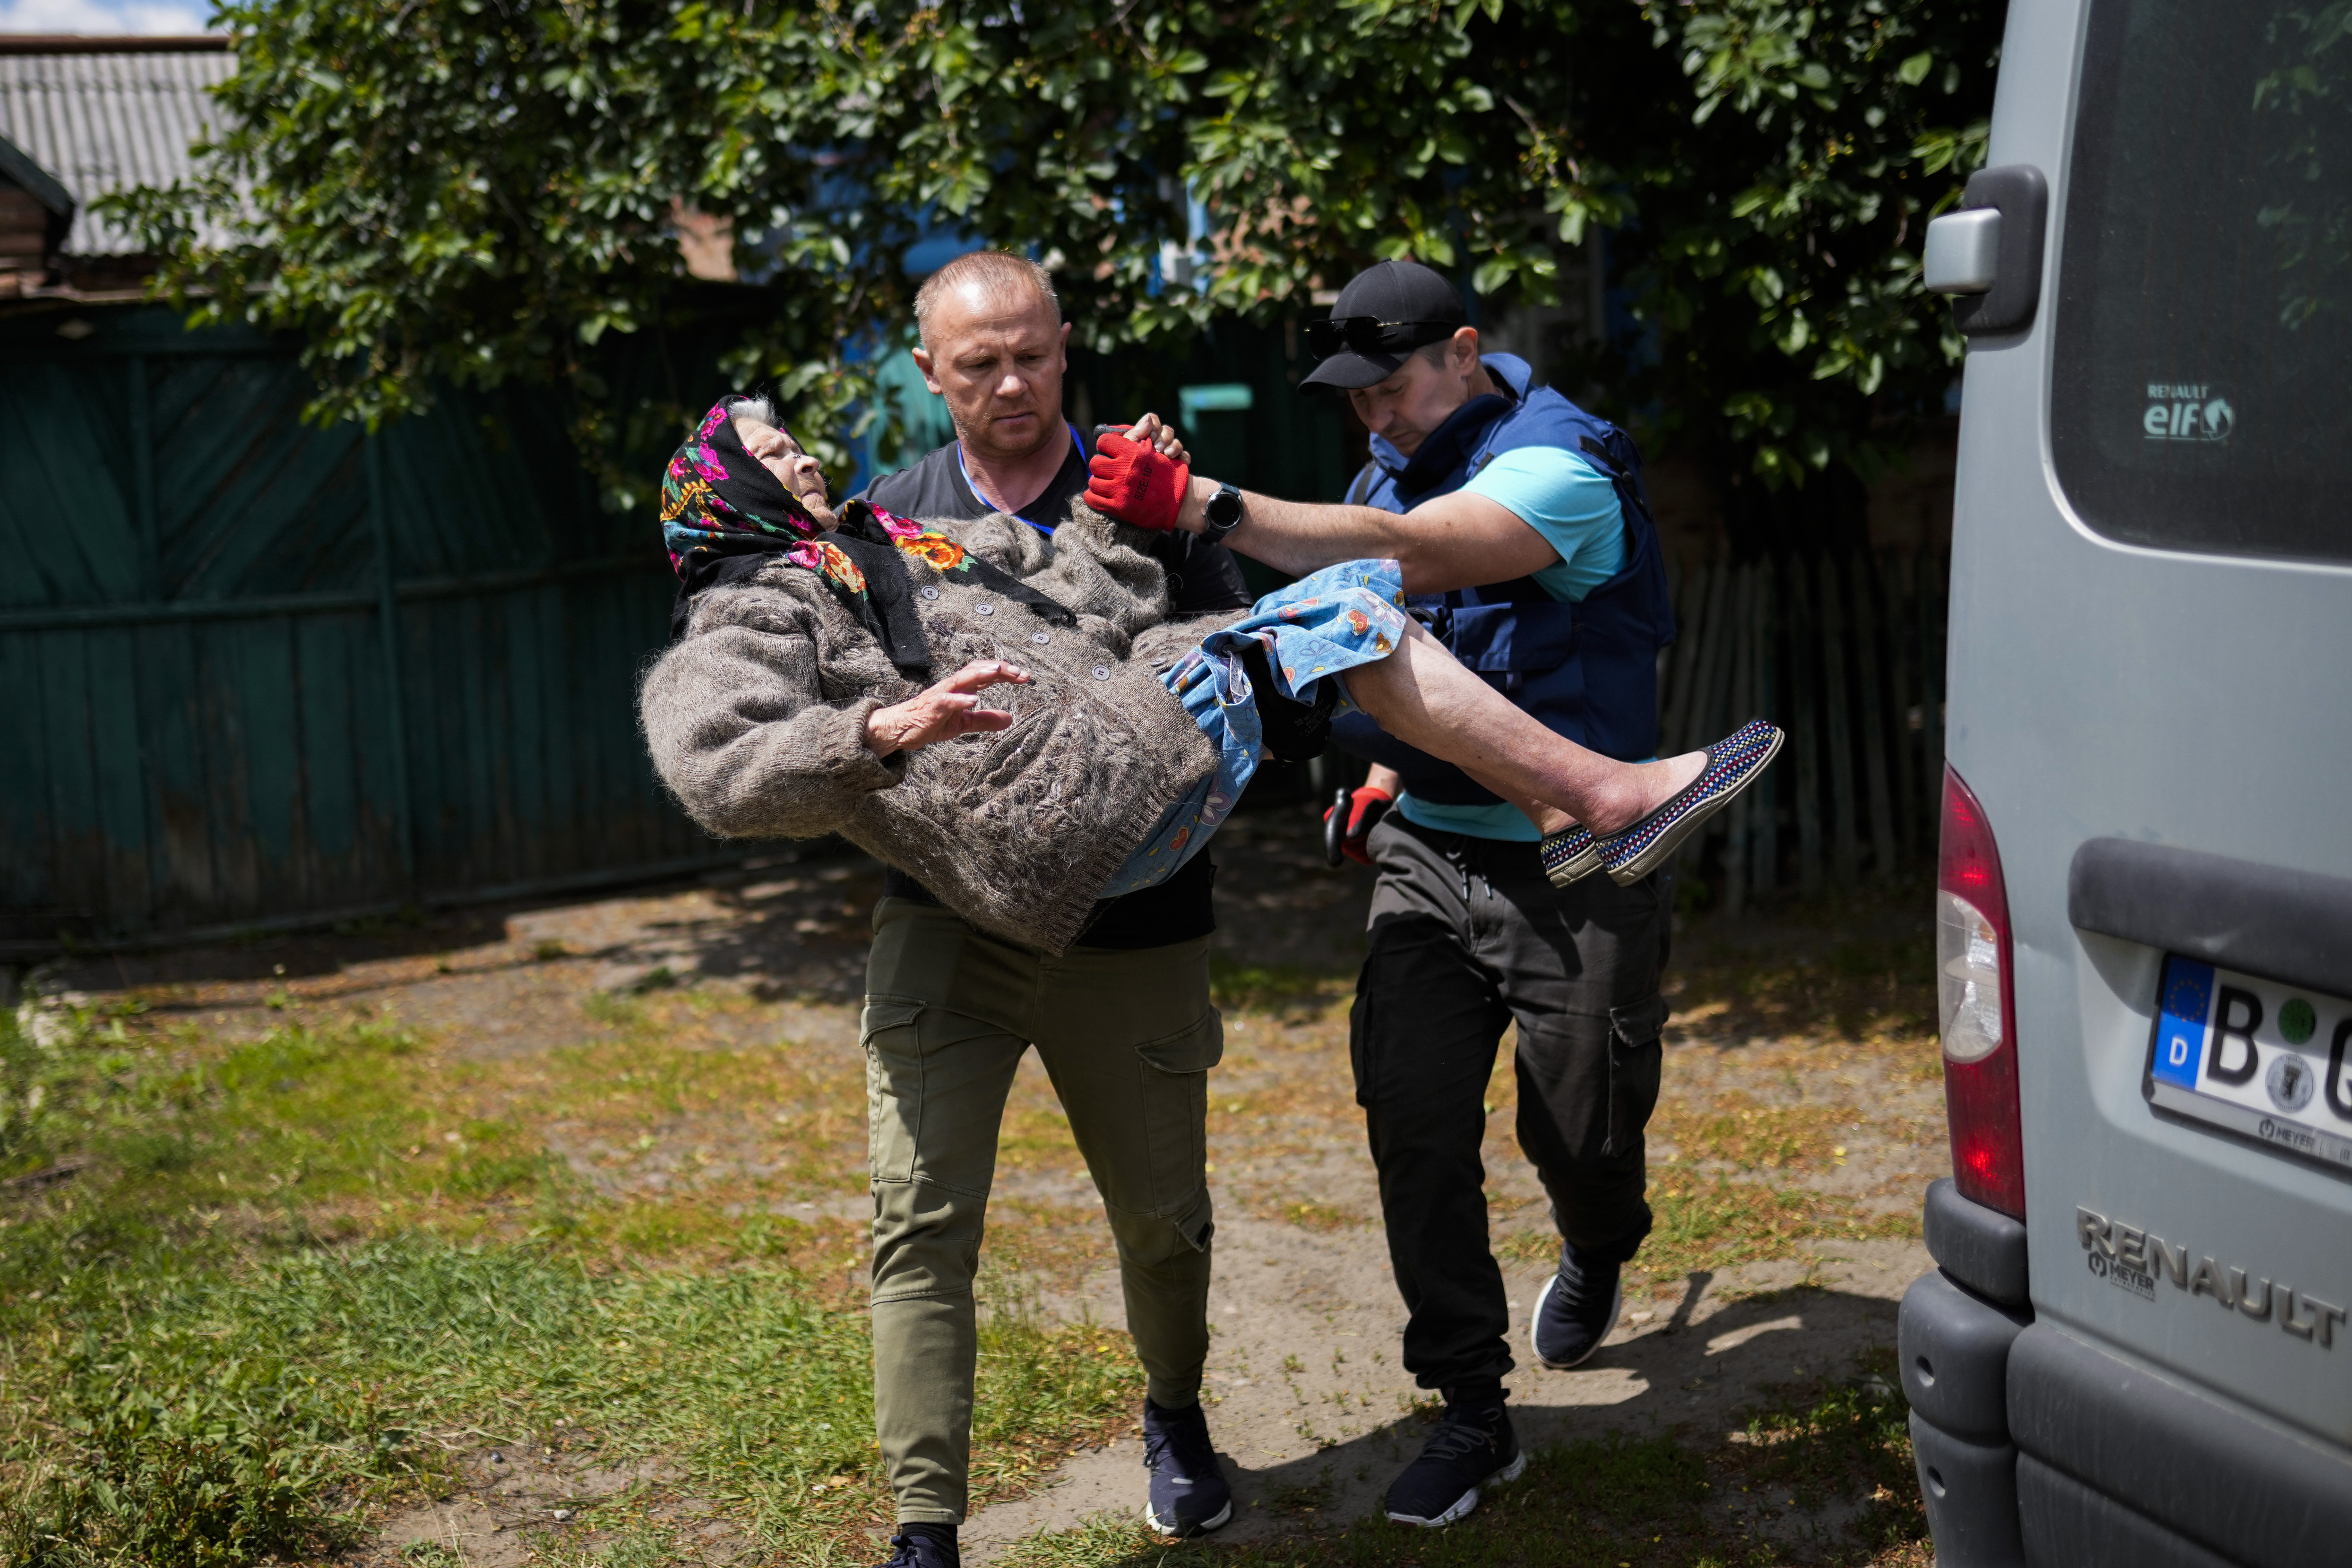 A woman is carried from her home in an evacuation by volunteers of Vostok SOS charitable organisation in Bakhmut, eastern Ukraine, Friday, May 27, 2022. Volunteers have been racing to evacuate as many civilians as possible, particularly the elderly and those with mobility issues, as Russian forces make advances in the region. (AP Photo/Francisco Seco)